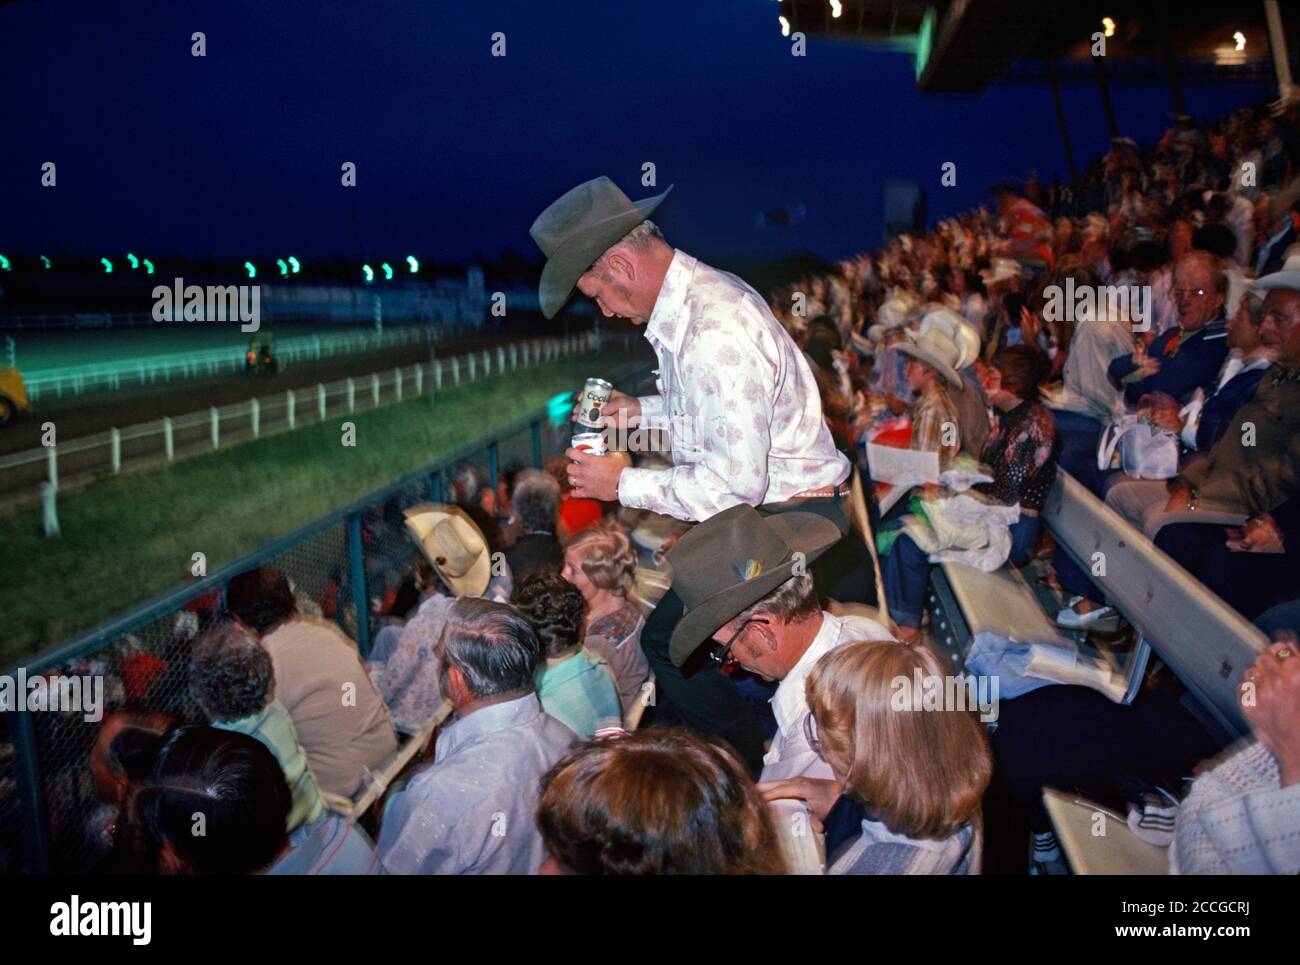 SPECTATOR WITH CANS OF BEER AT BUCKBOARD RACING, CHEYENNE, WYOMING, USA 1970s Stock Photo